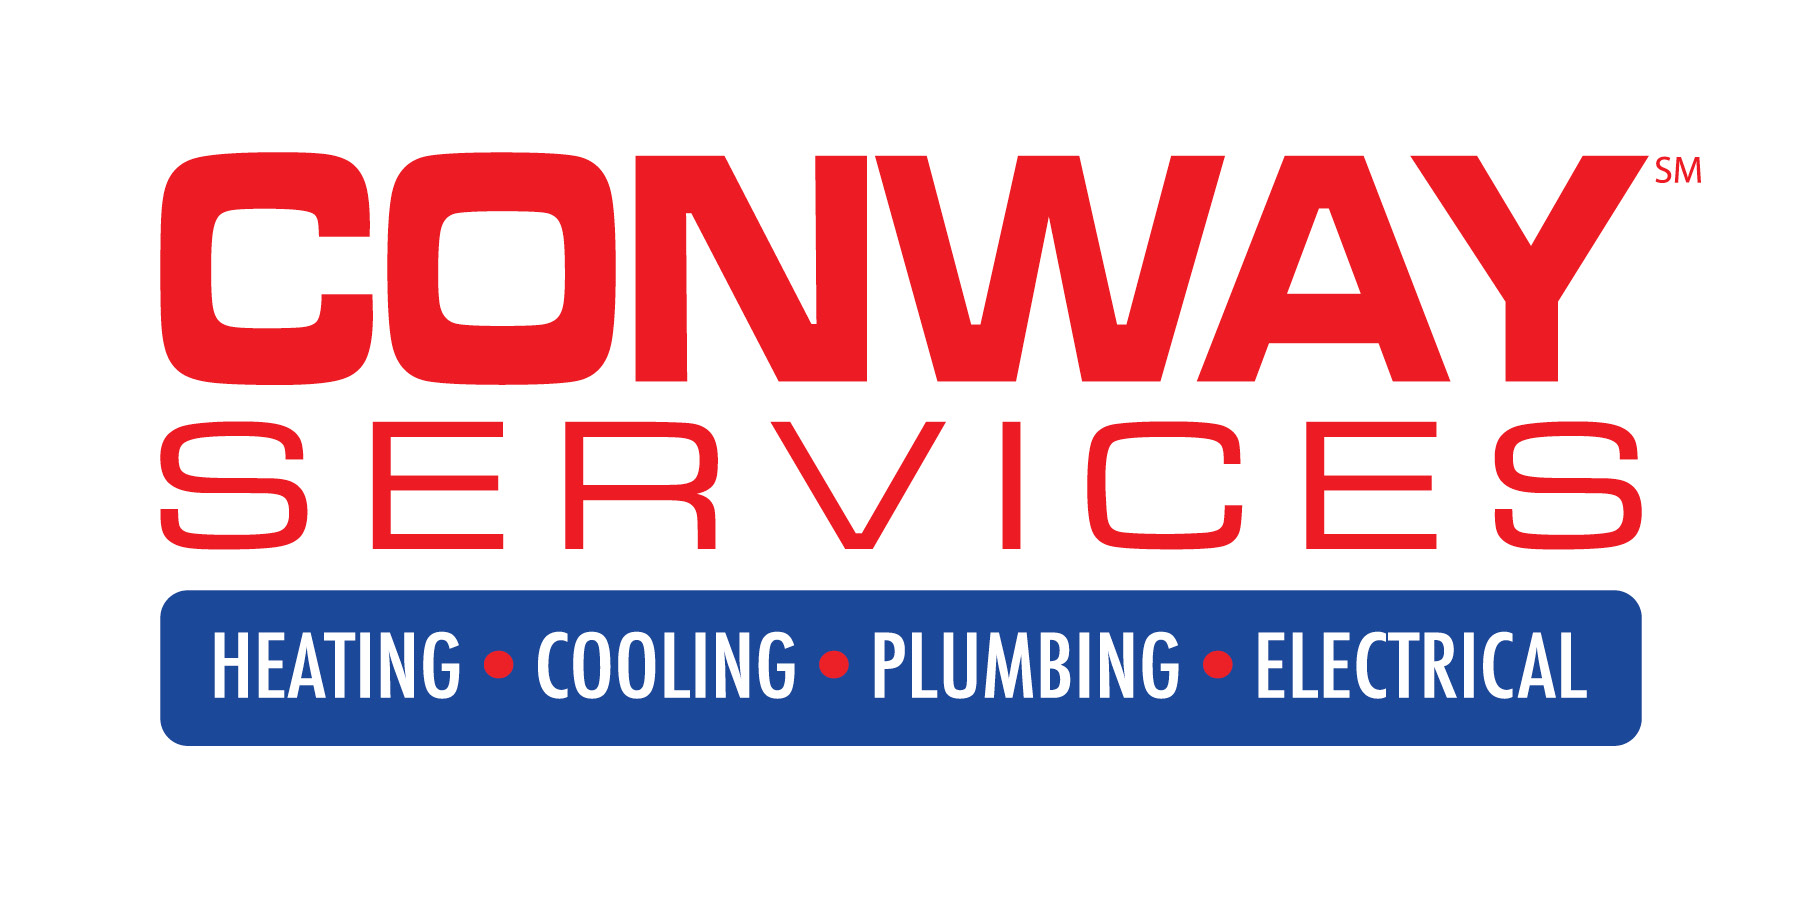 Hvac Plumbing Specials Conway Services In Memphis